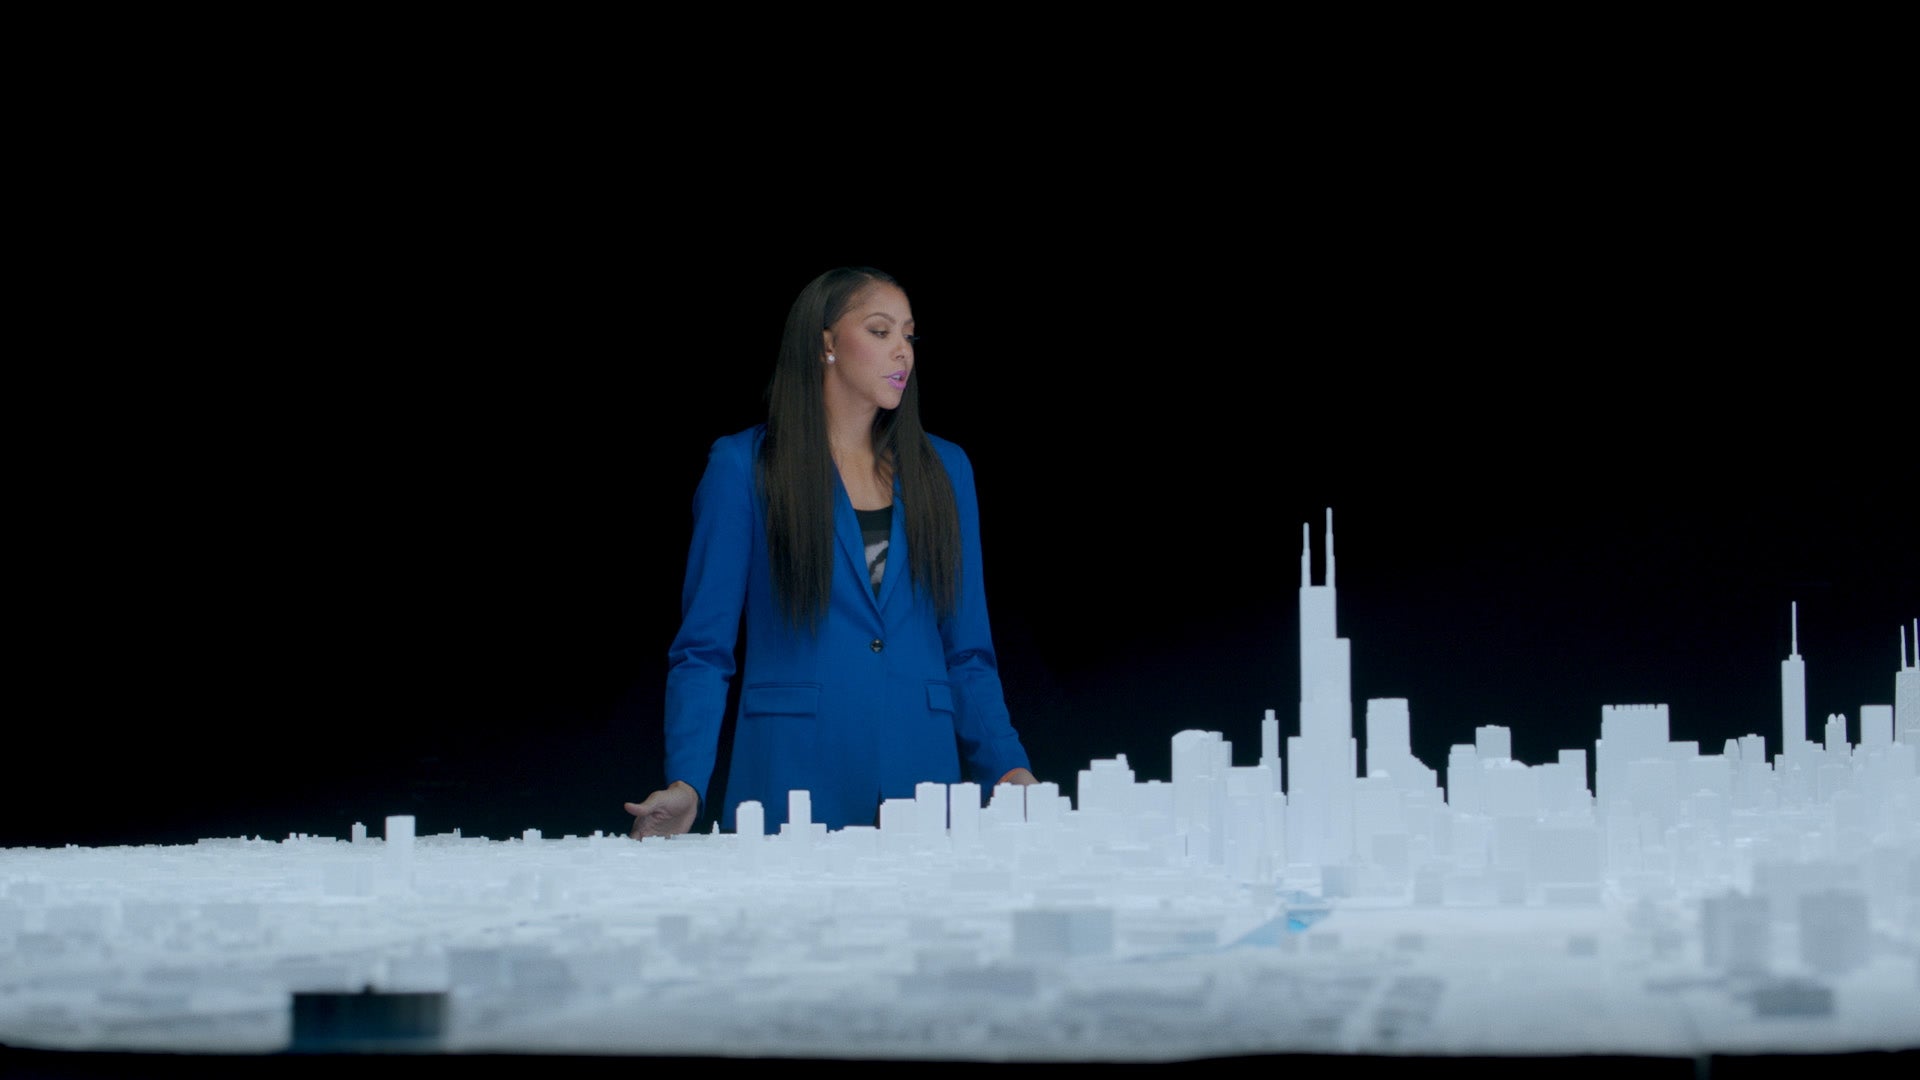 Candace Parker with Microscape's 15 foot diameter circular model of Chicago